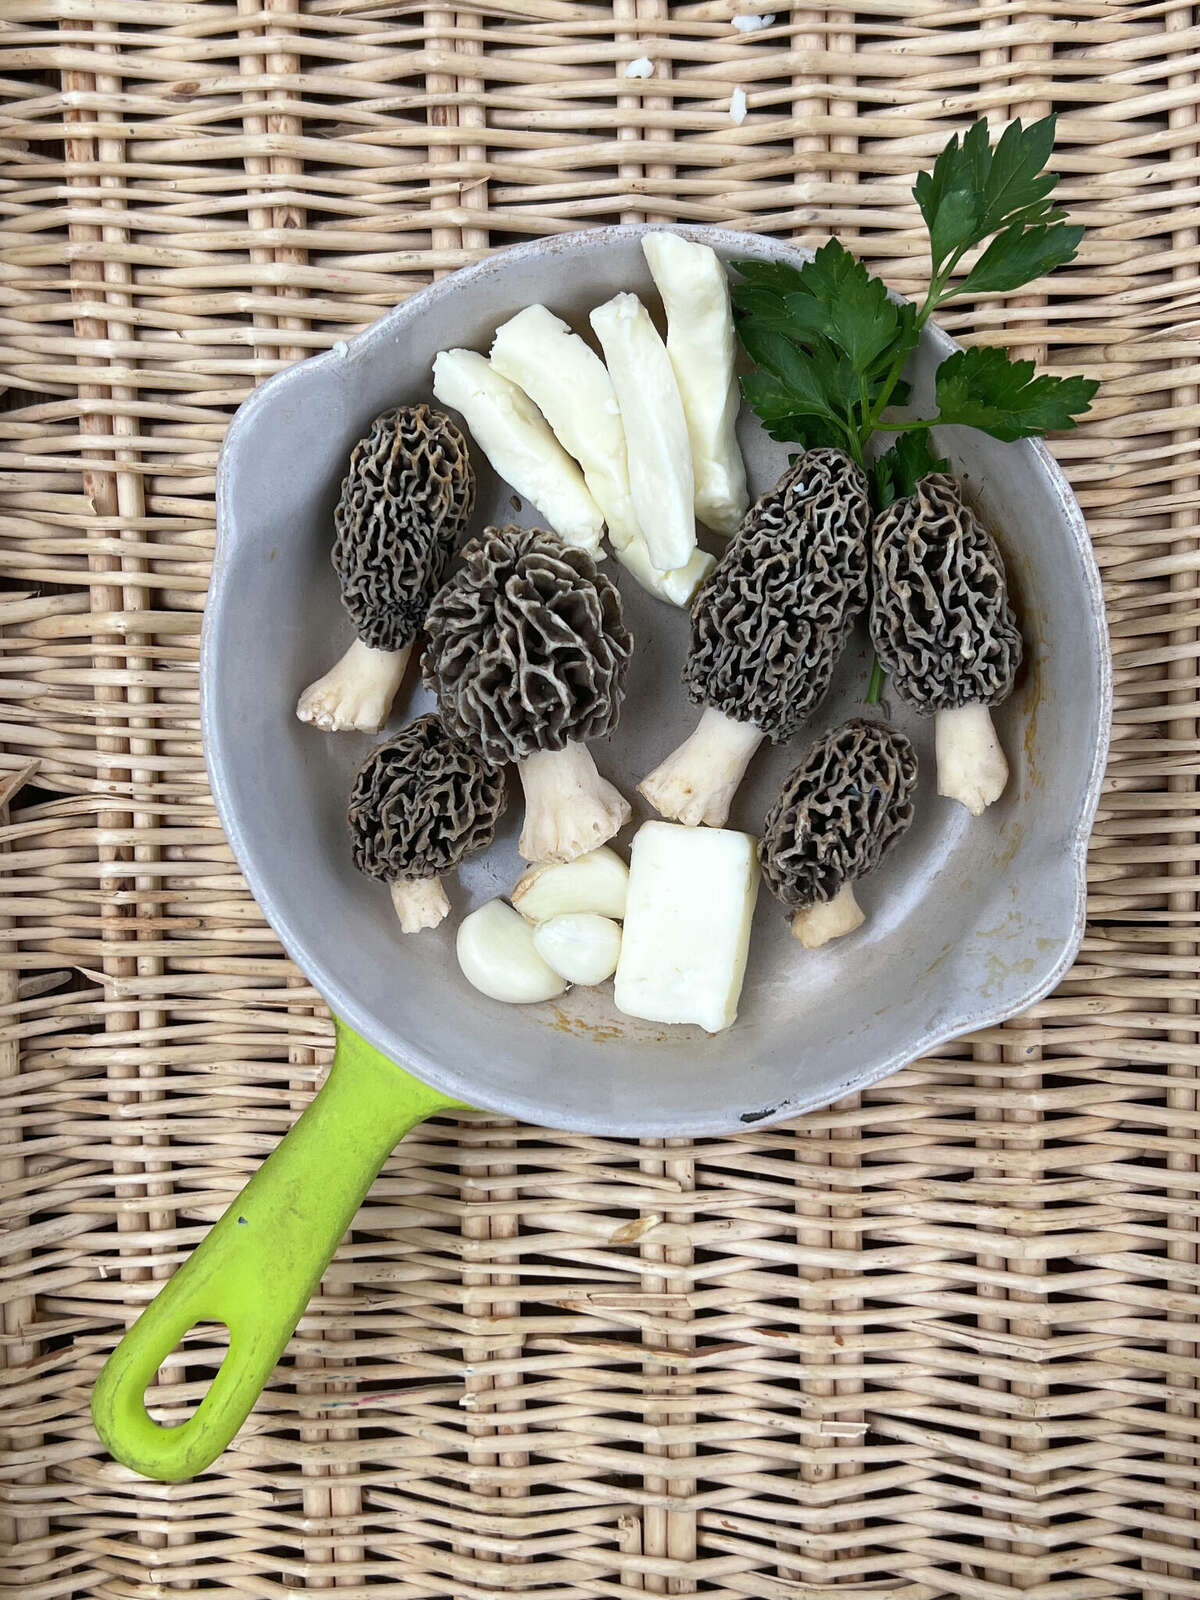 Common morels, known as "yellows," and found by Gary Vondrasek, of Edwardsville, sit in a skillet with garlic, fine cheeses and parsley, which are the ingredients for a scrambled egg morel and garlic brunch recipe. This morel species is one of the most readily recognized of all the edible mushrooms and highly sought.